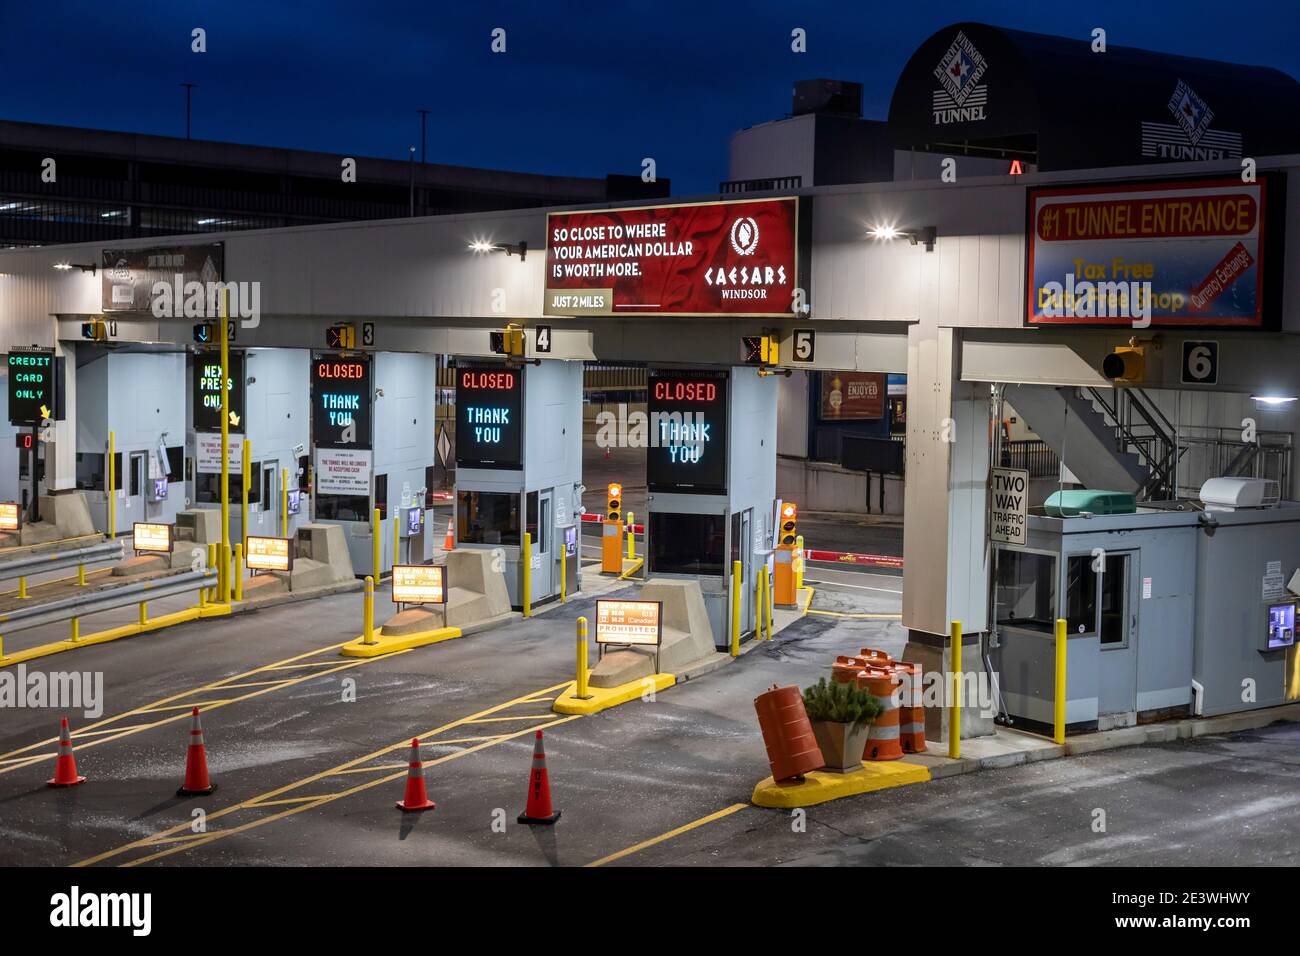 Detroit, Michigan - Toll booths are closed as there is little traffic at the Detroit-Windsor Tunnel, which connects the United States and Canada. Cros Stock Photo